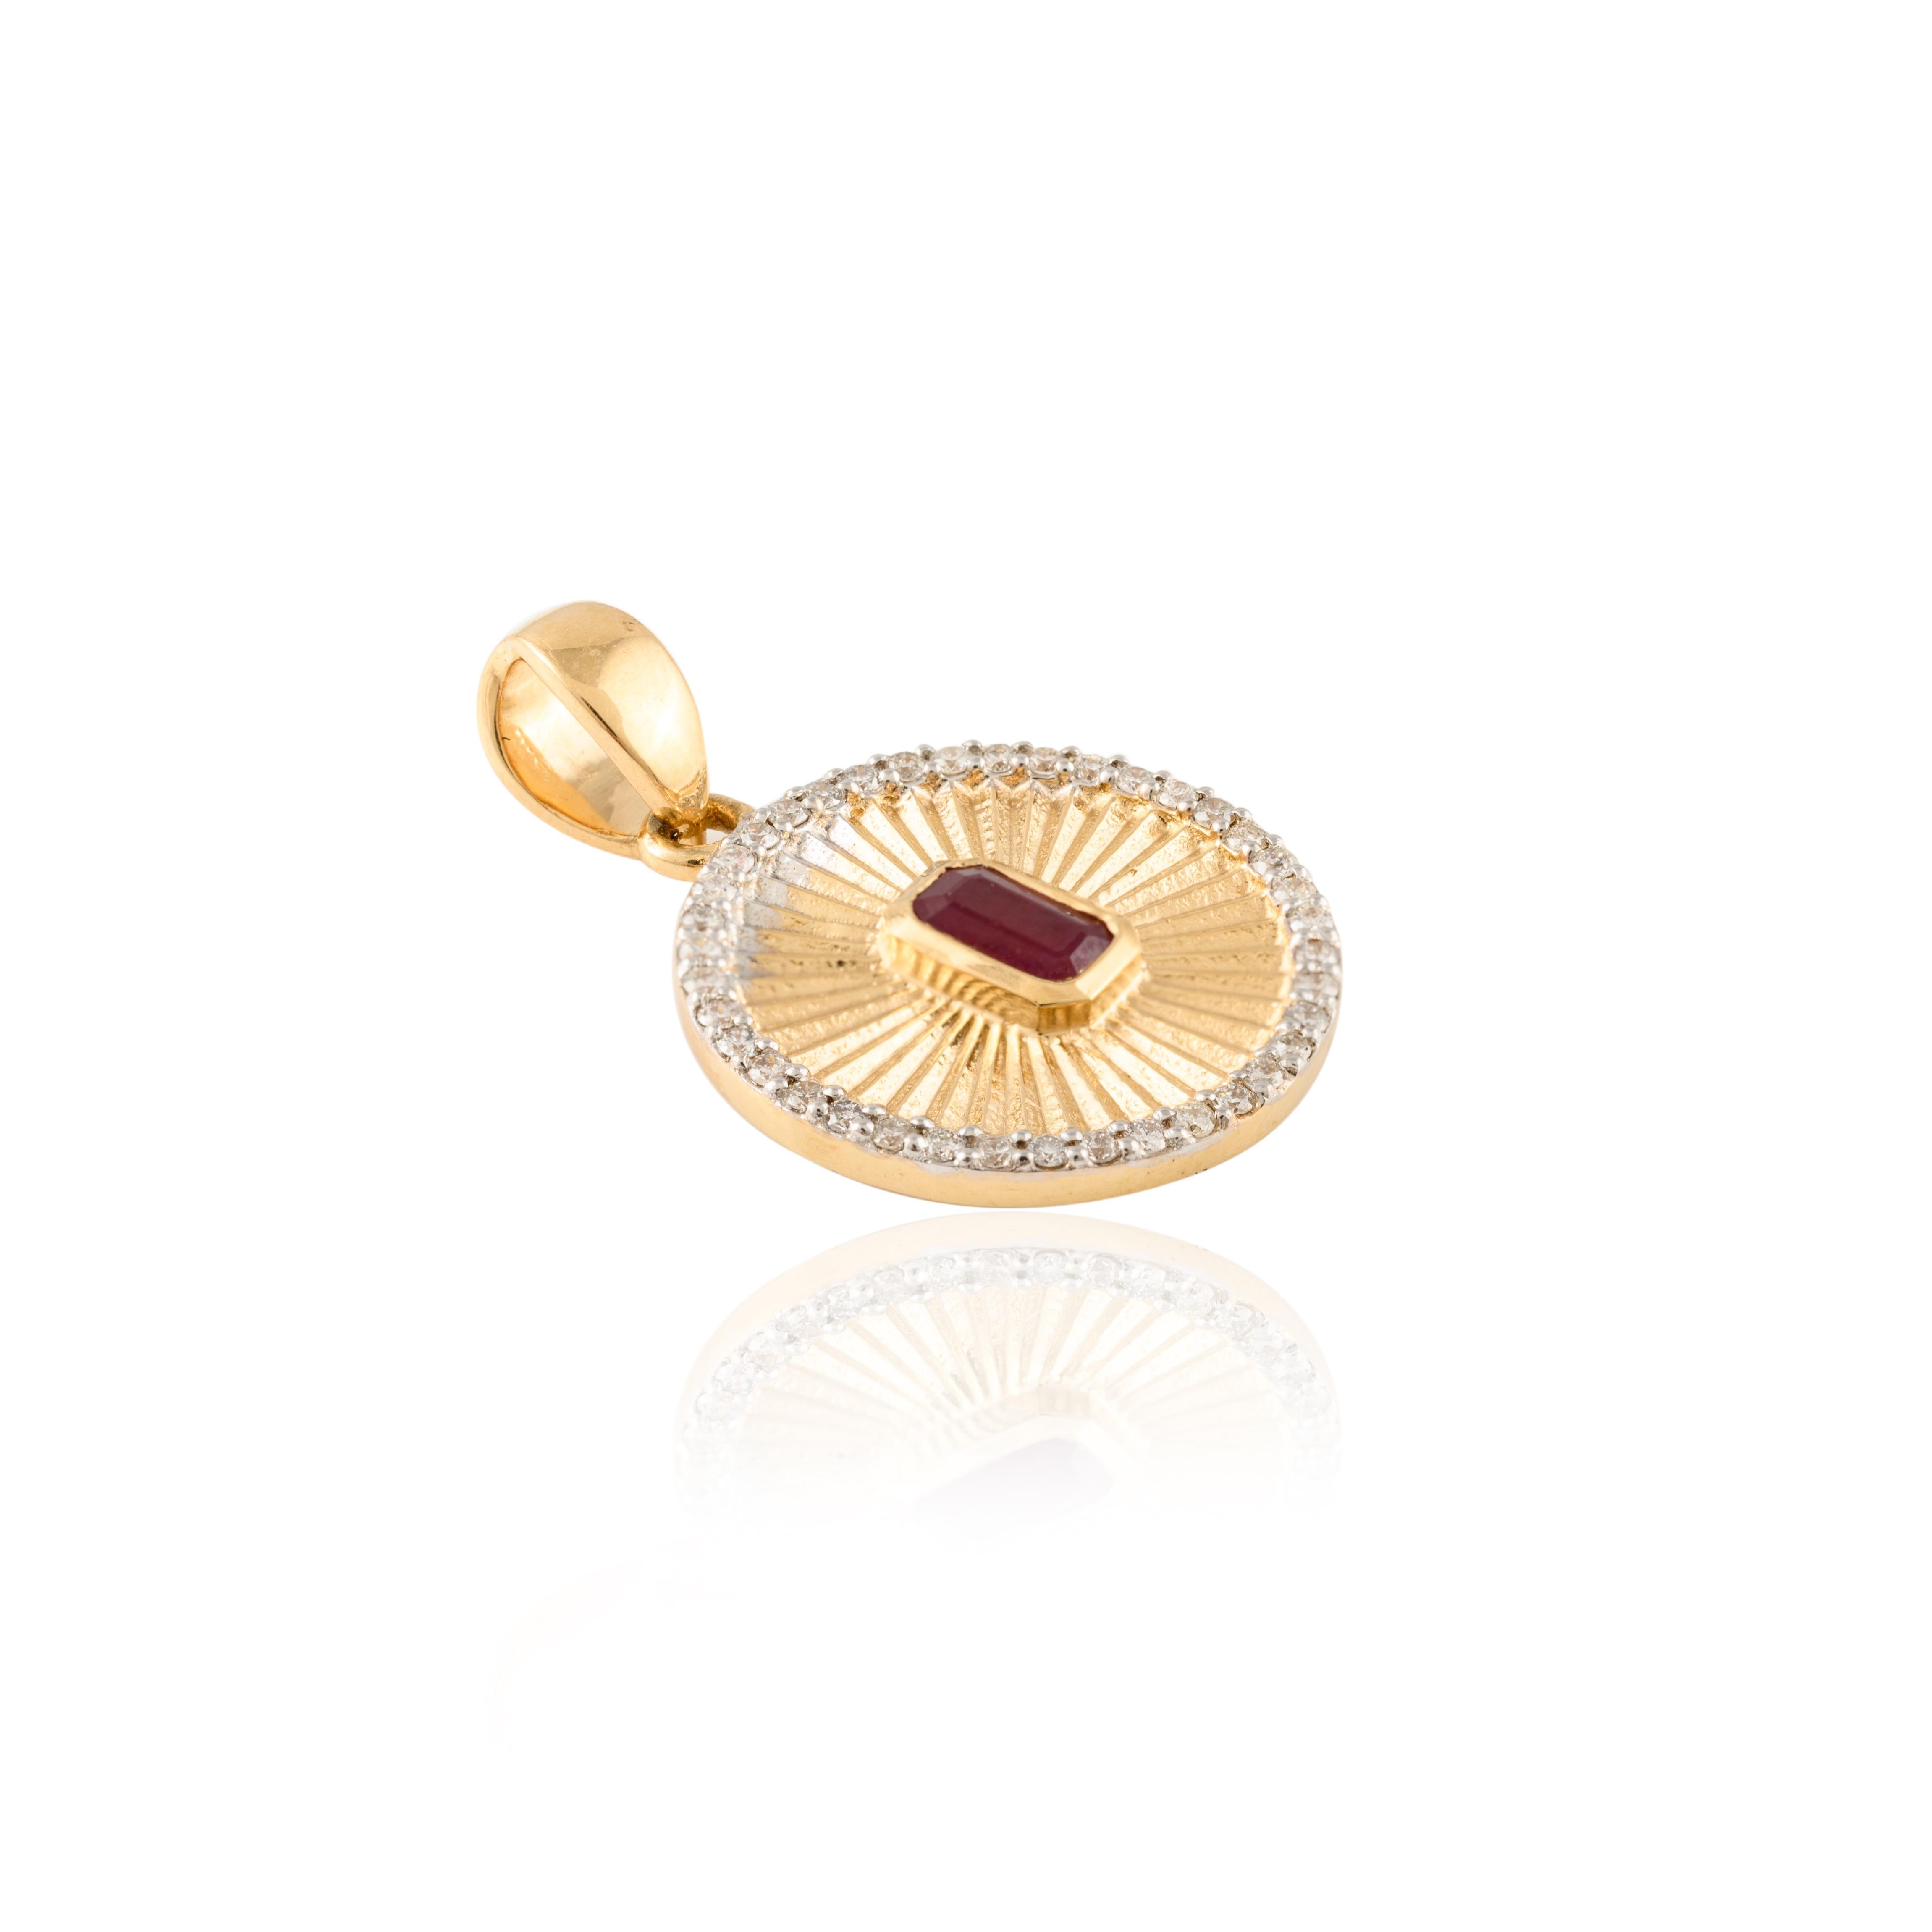 Octagon Cut Ruby Medallion Charm Pendant 18k Solid Yellow Gold, Gift For Her Christmas For Sale